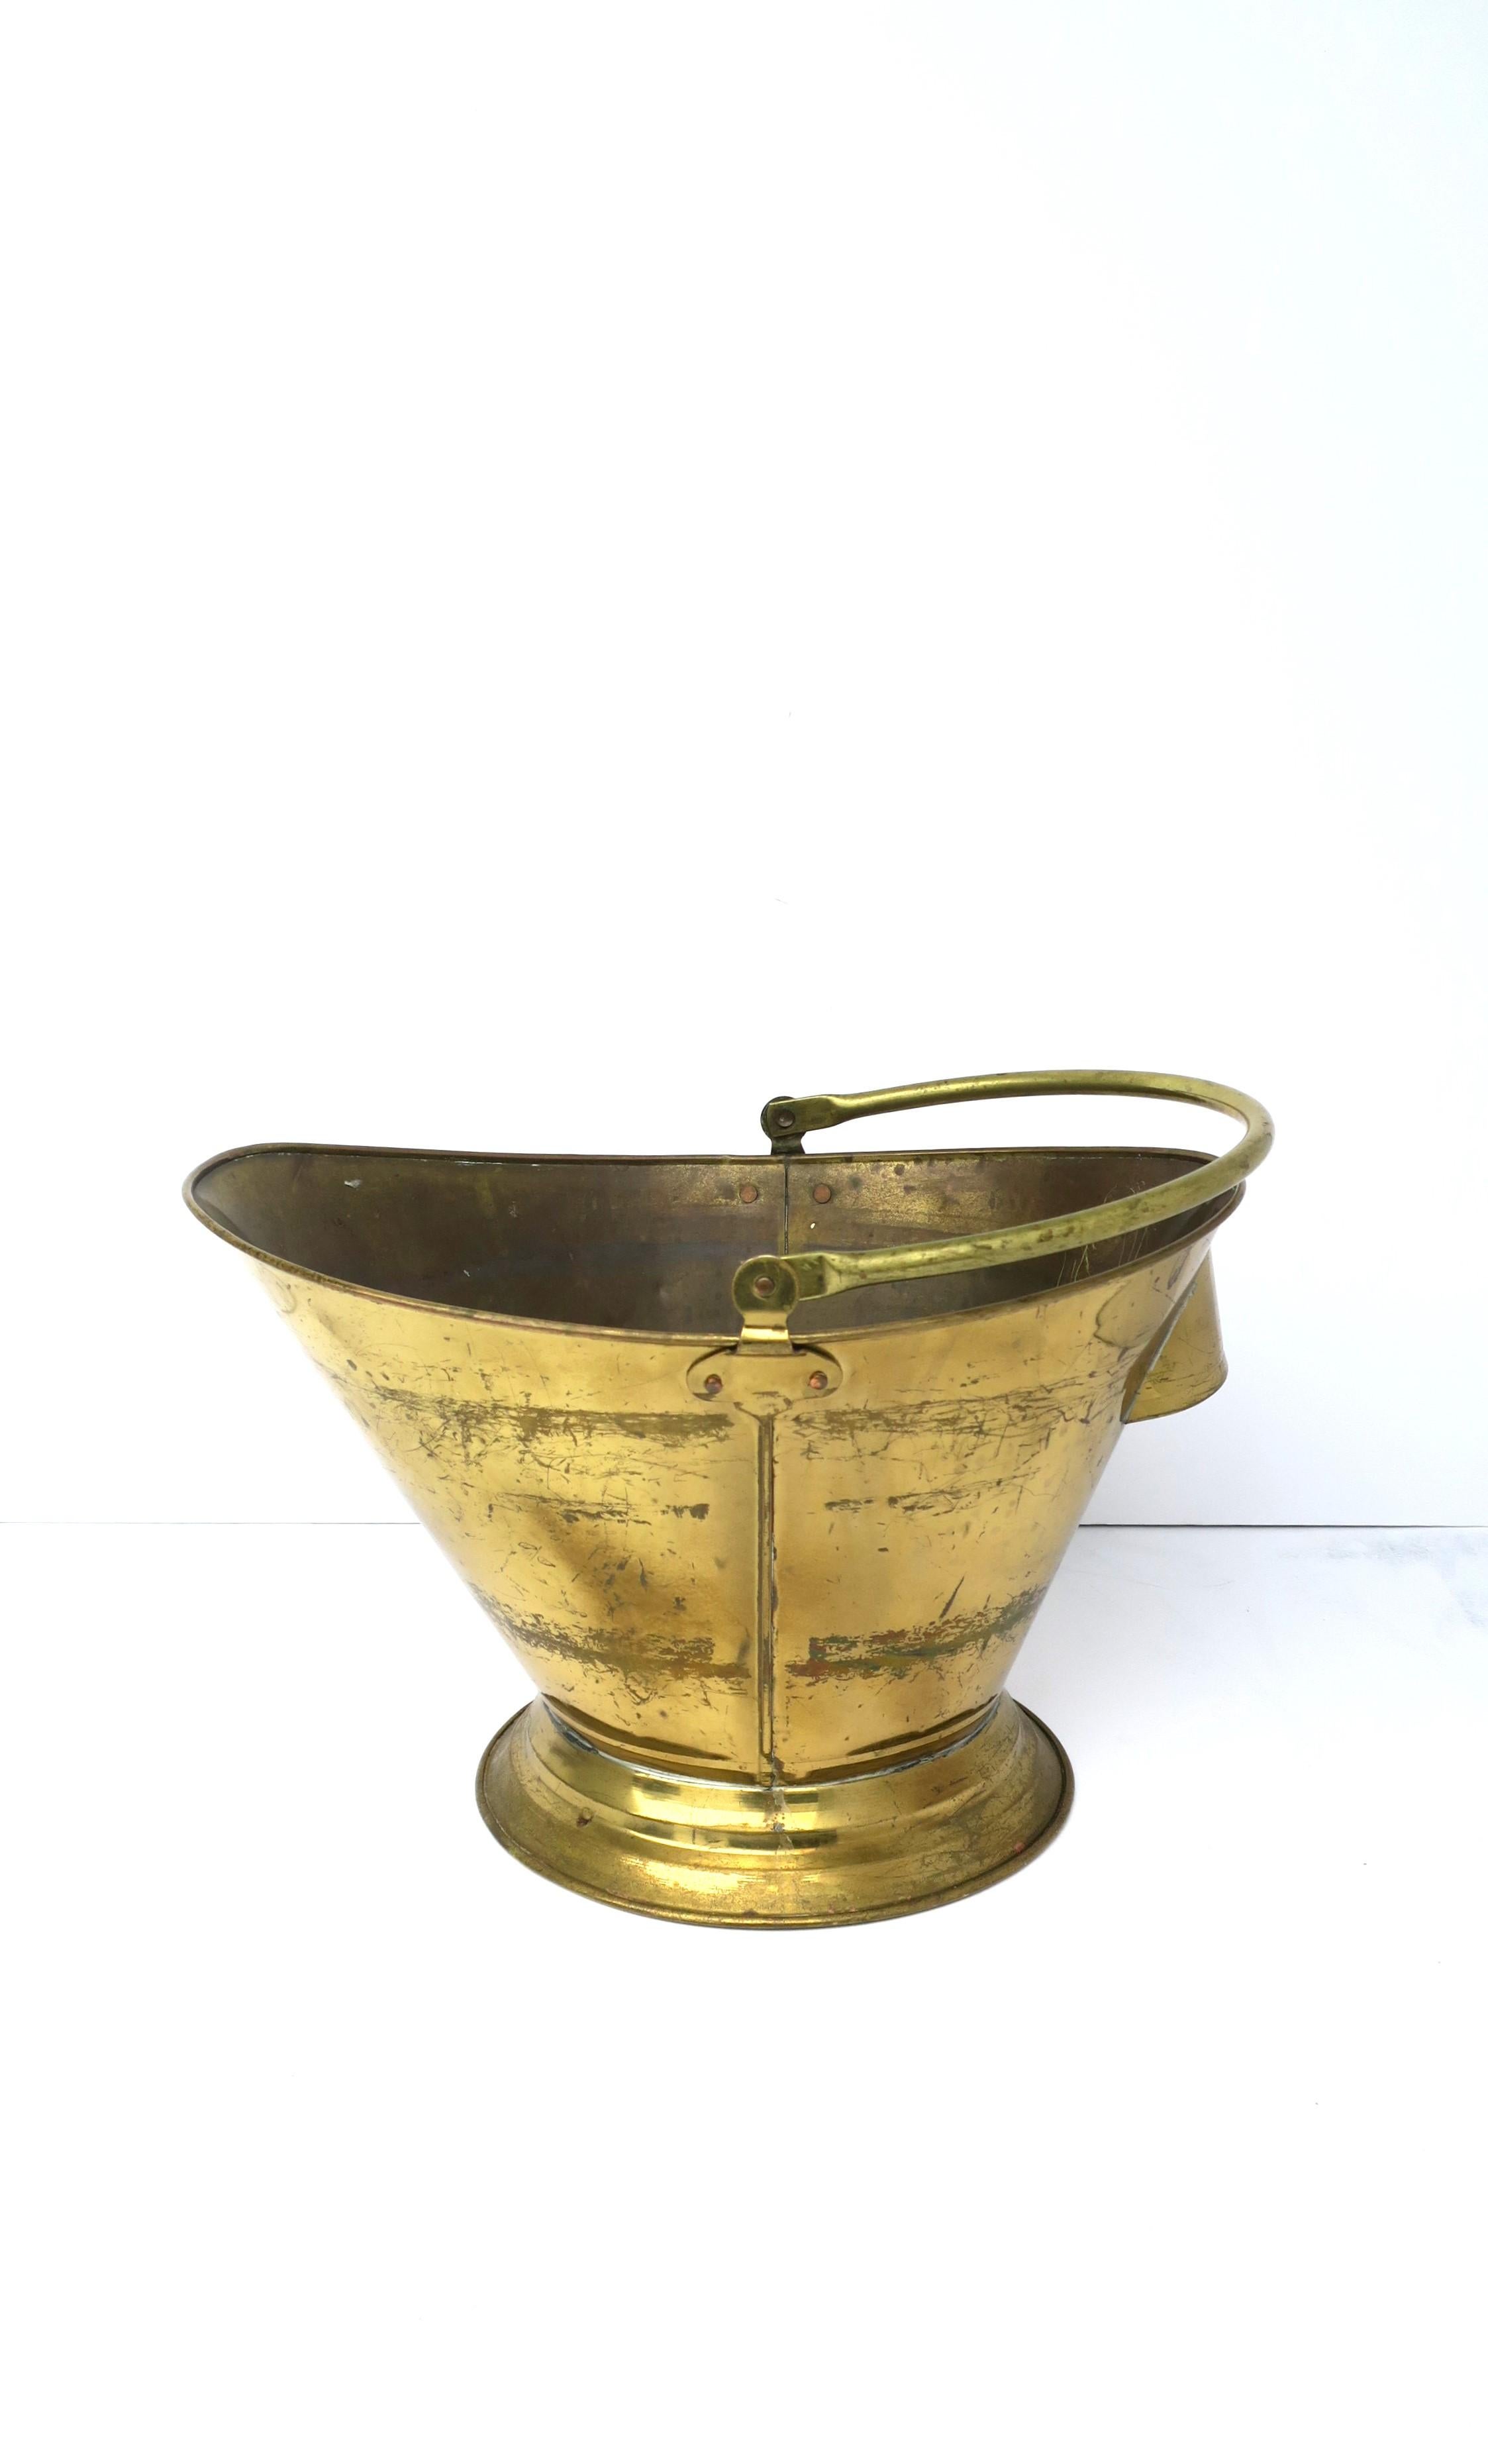 An English brass coal scuttle fireplace pot bucket, circa early to mid-20th century, England. Marked 'England' on underside as shown in last image. Bucket pot has flexible top handle and rear handle for easy lifting/emptying. Bucket has a lacquered